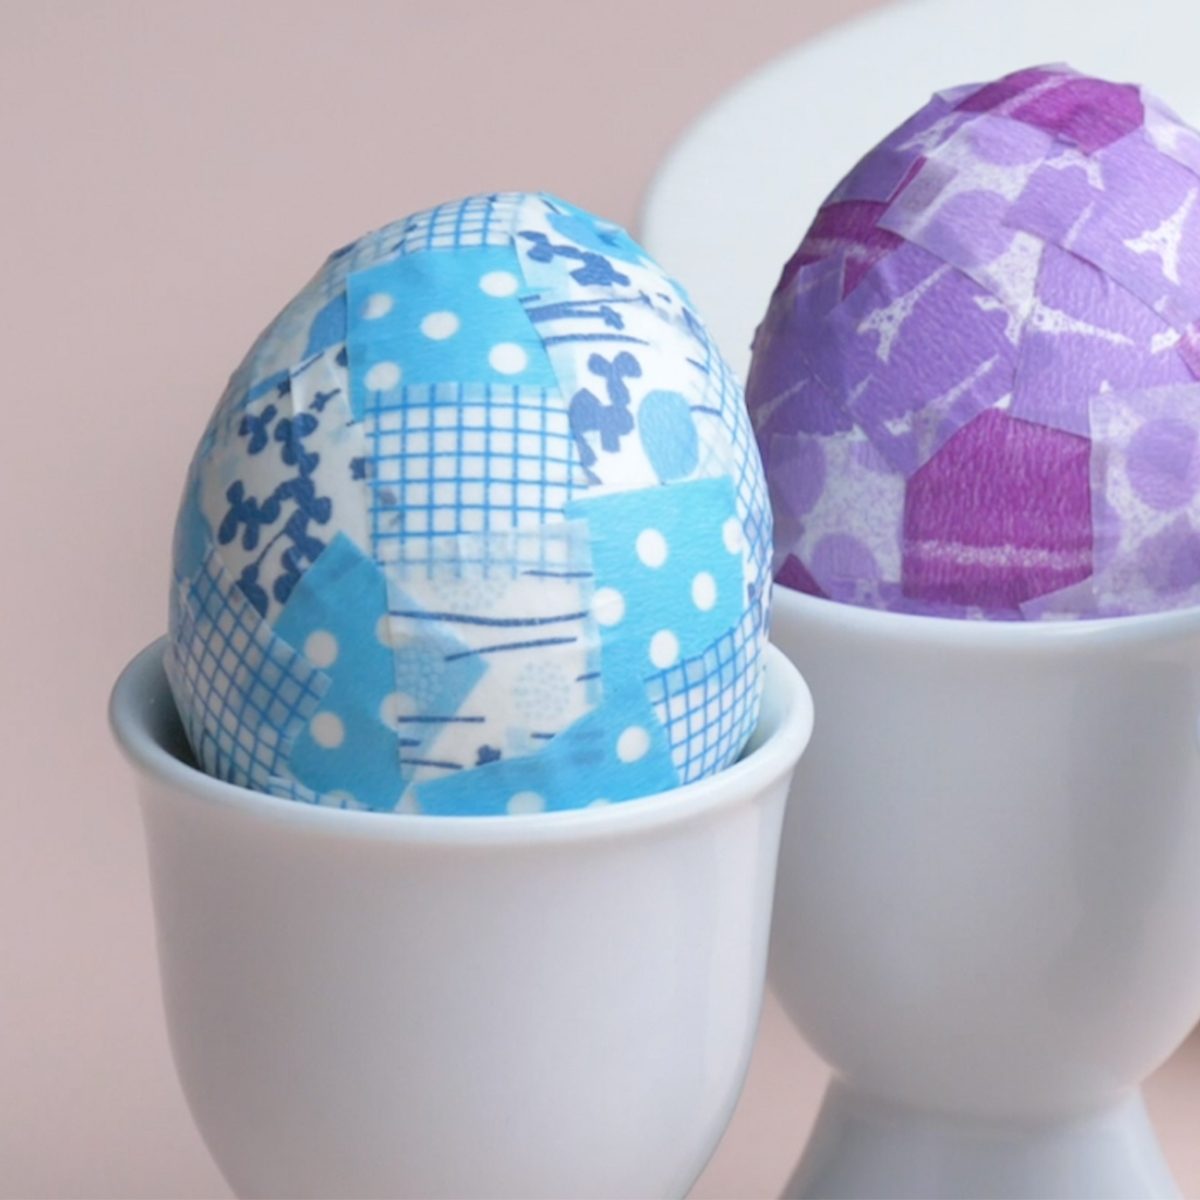 Easter egg decorating ideas using washi tape and in an egg holder